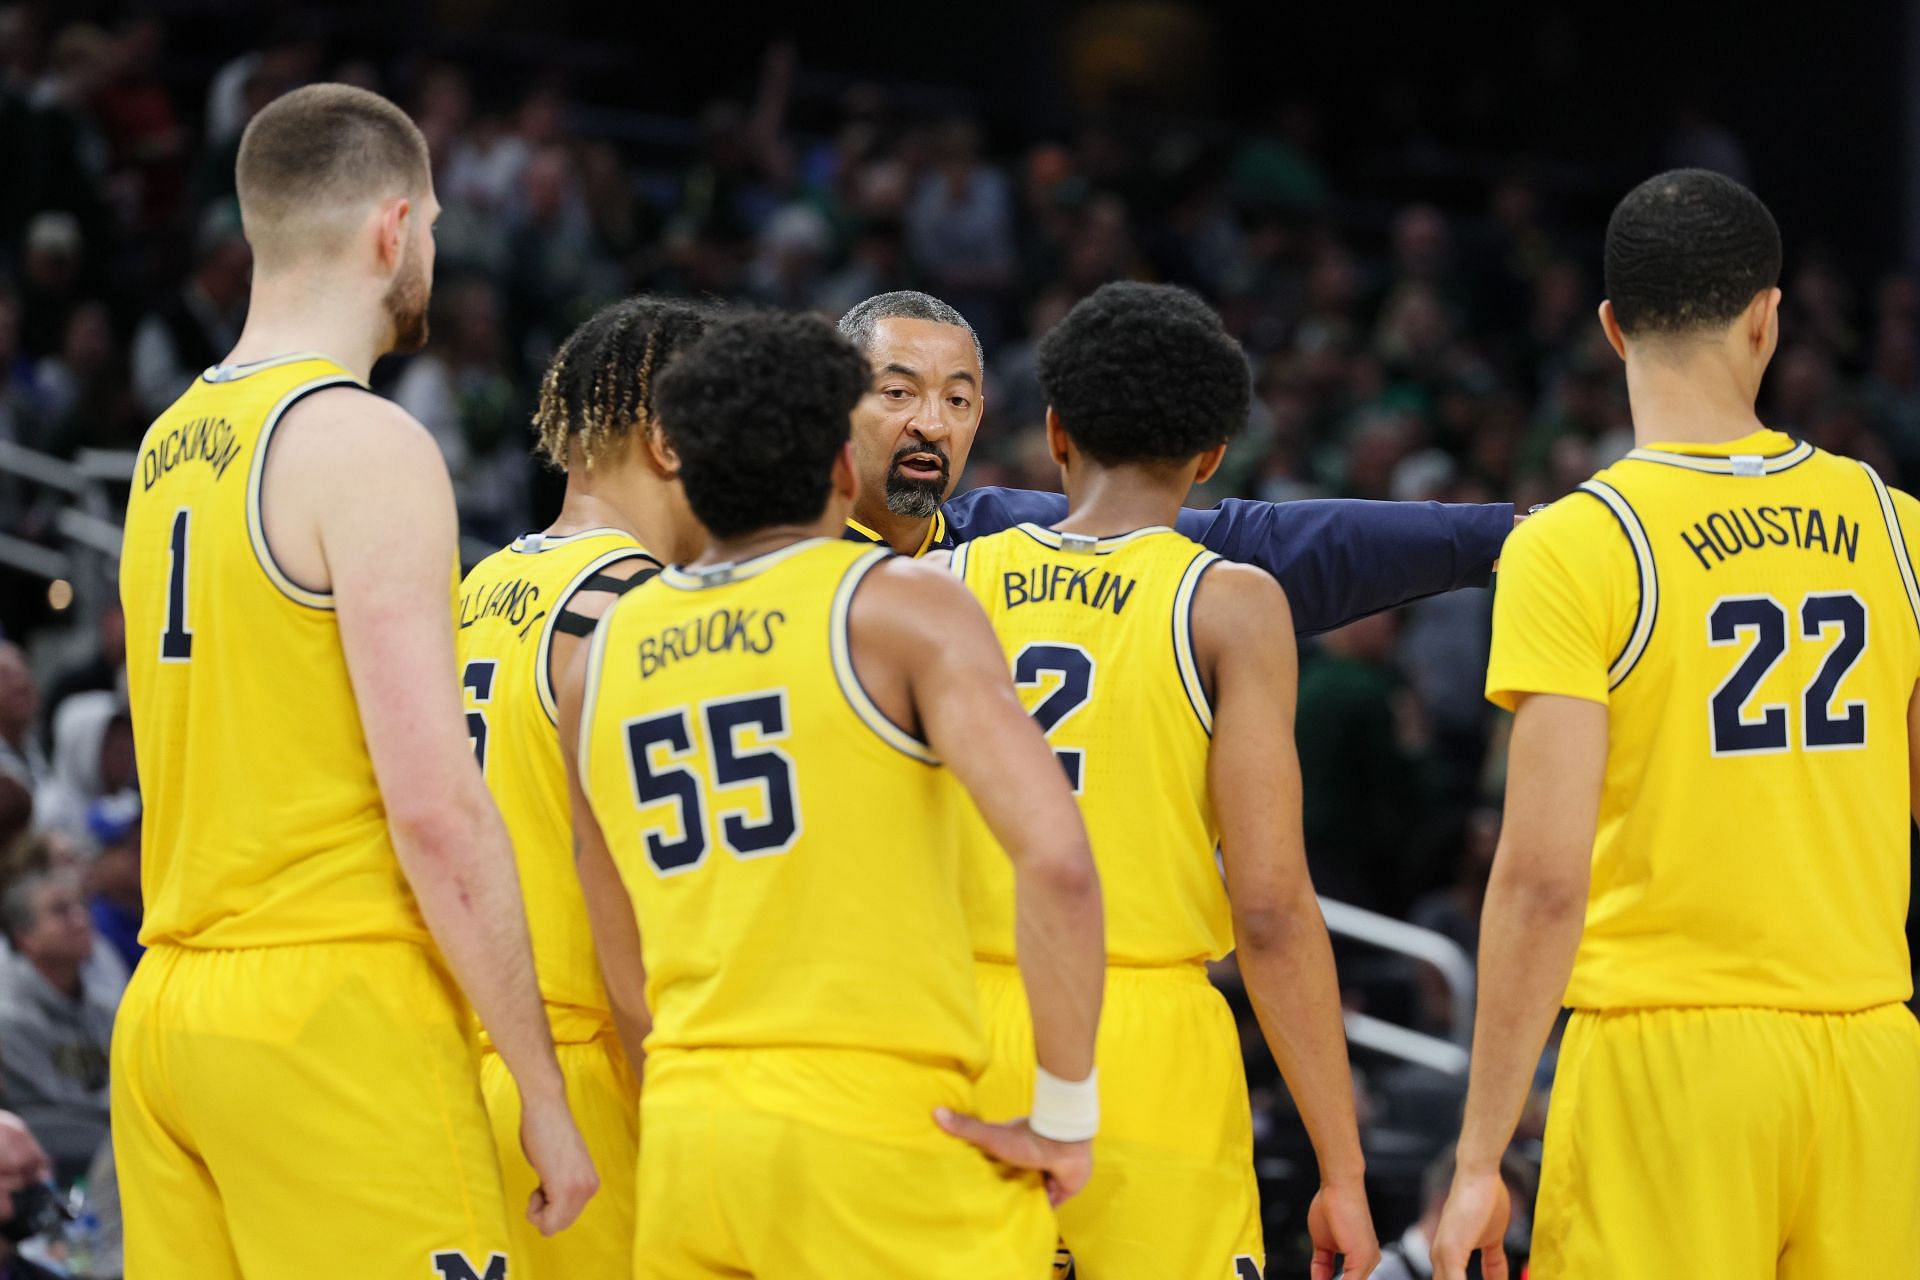 The Michigan Wolverines look to be a potential Cinderella team